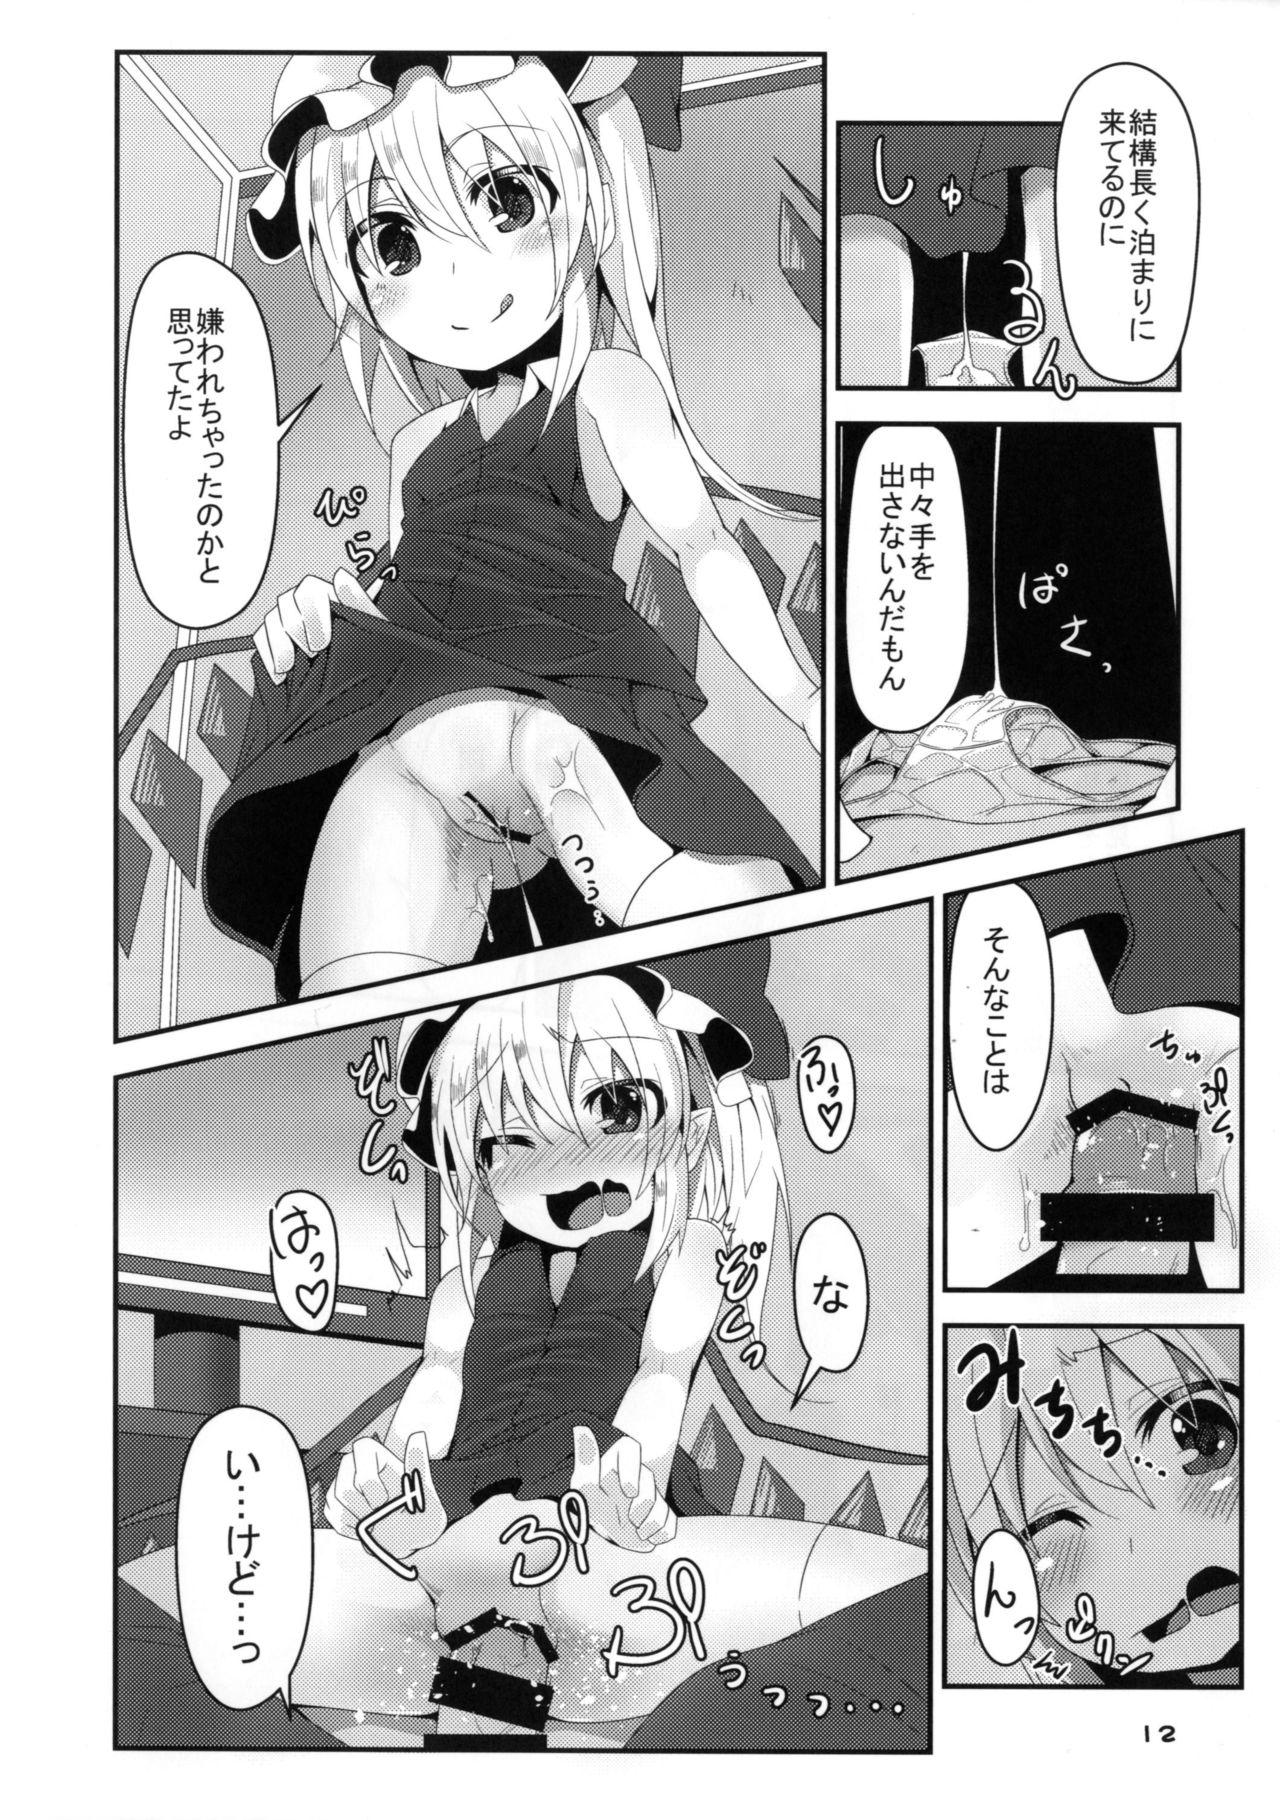 Petite Teen FLAN-CHAN COOL BIZ - Touhou project Tight Cunt - Page 11